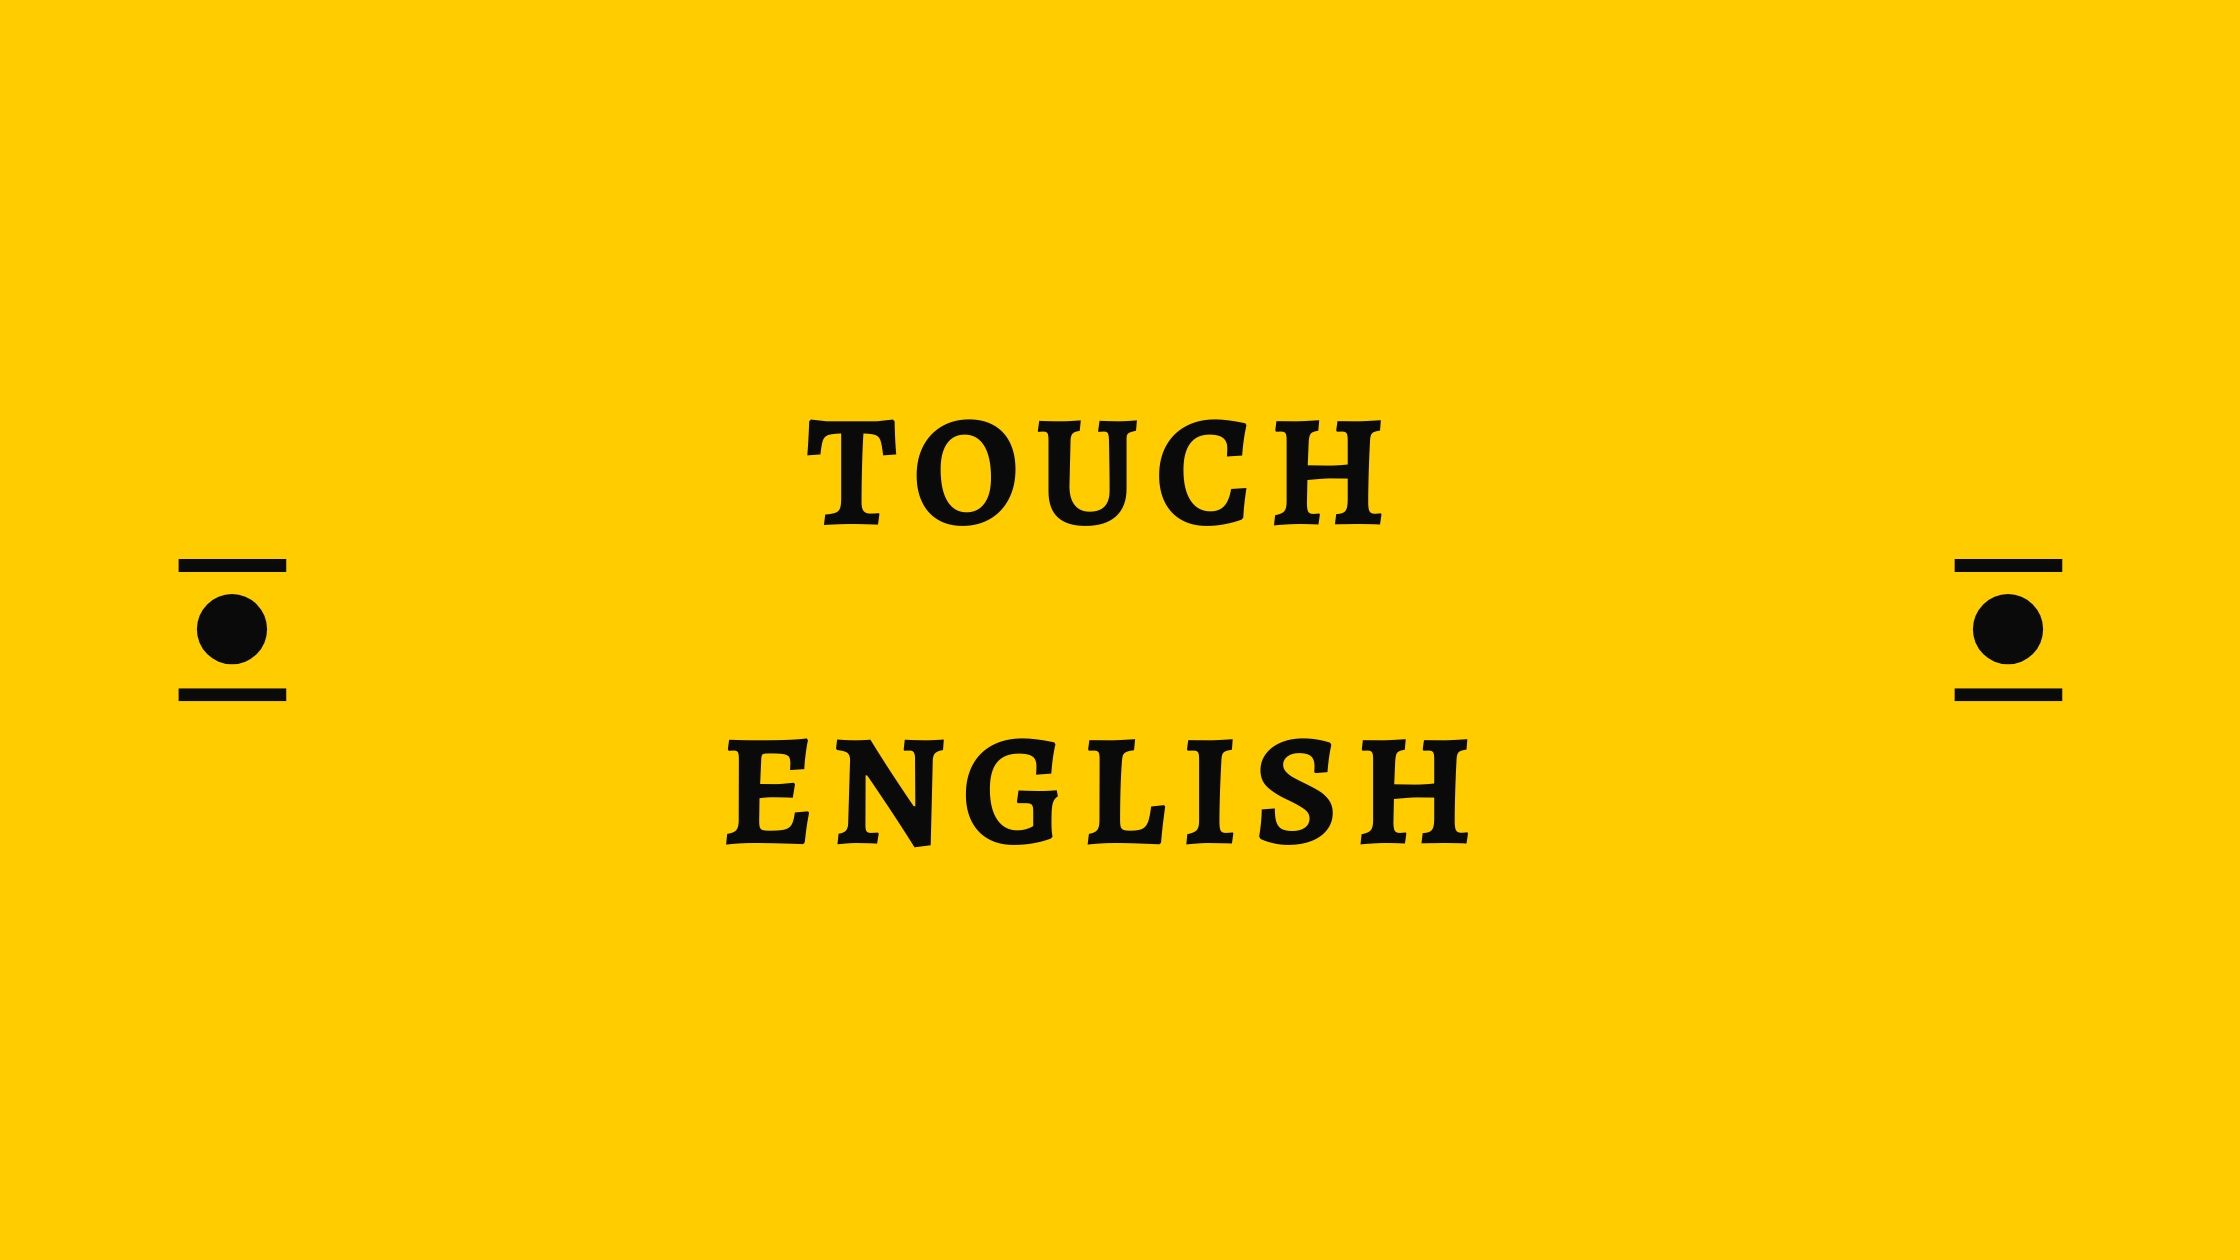 Touch English!